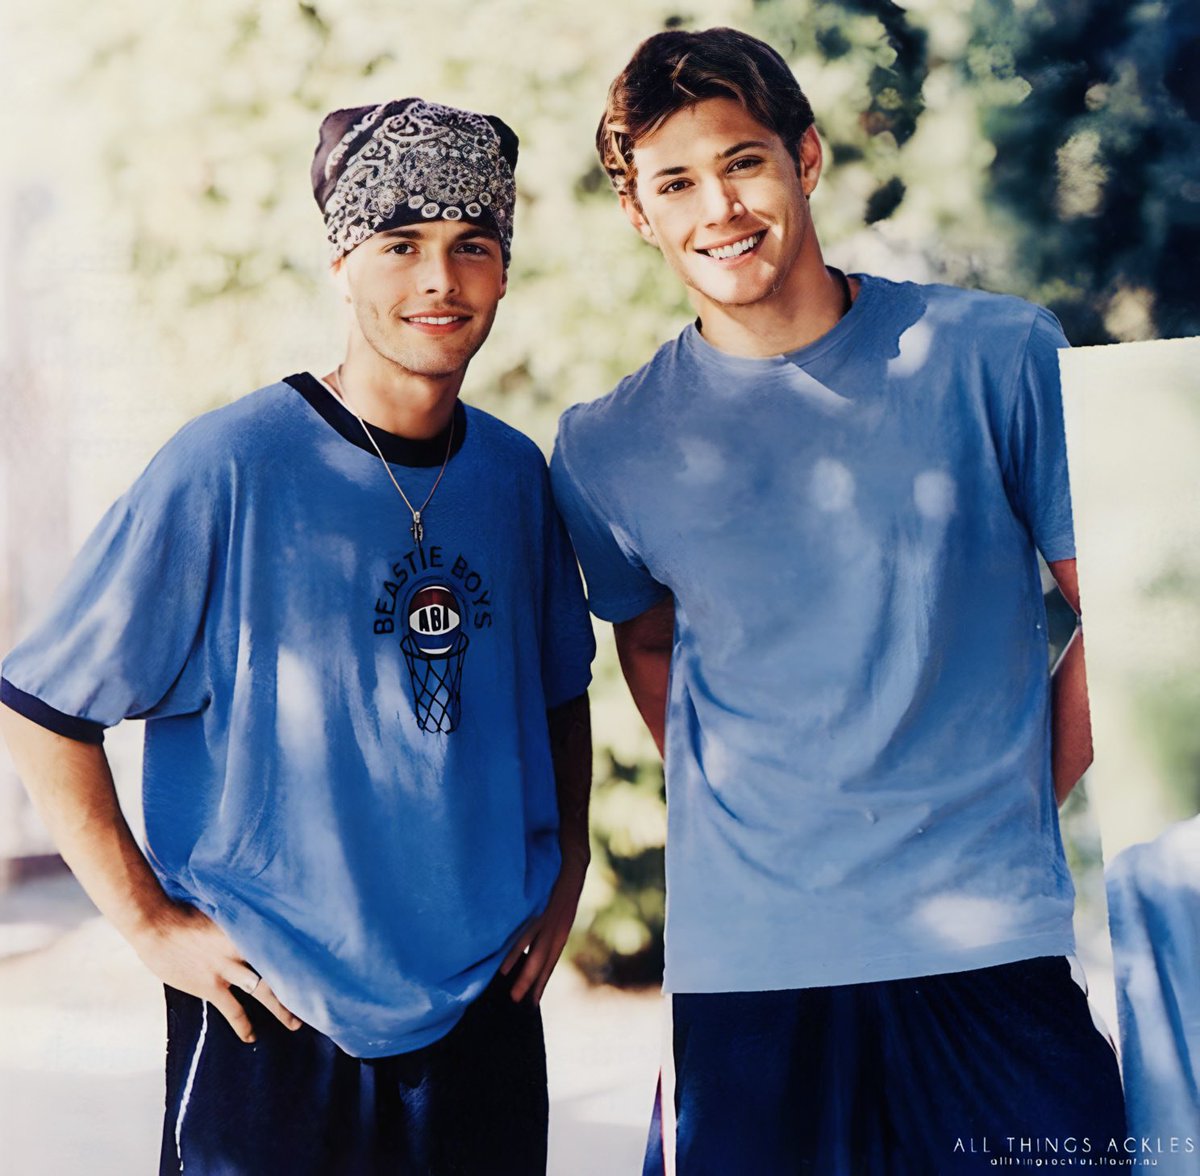 Throwback Thursday 💙💙 Young Jensen Ackles with Ty Vaughan from a 1999 YM Magazine article. 💙💙 #YMMagazine #JensenAckles #TyVaughan